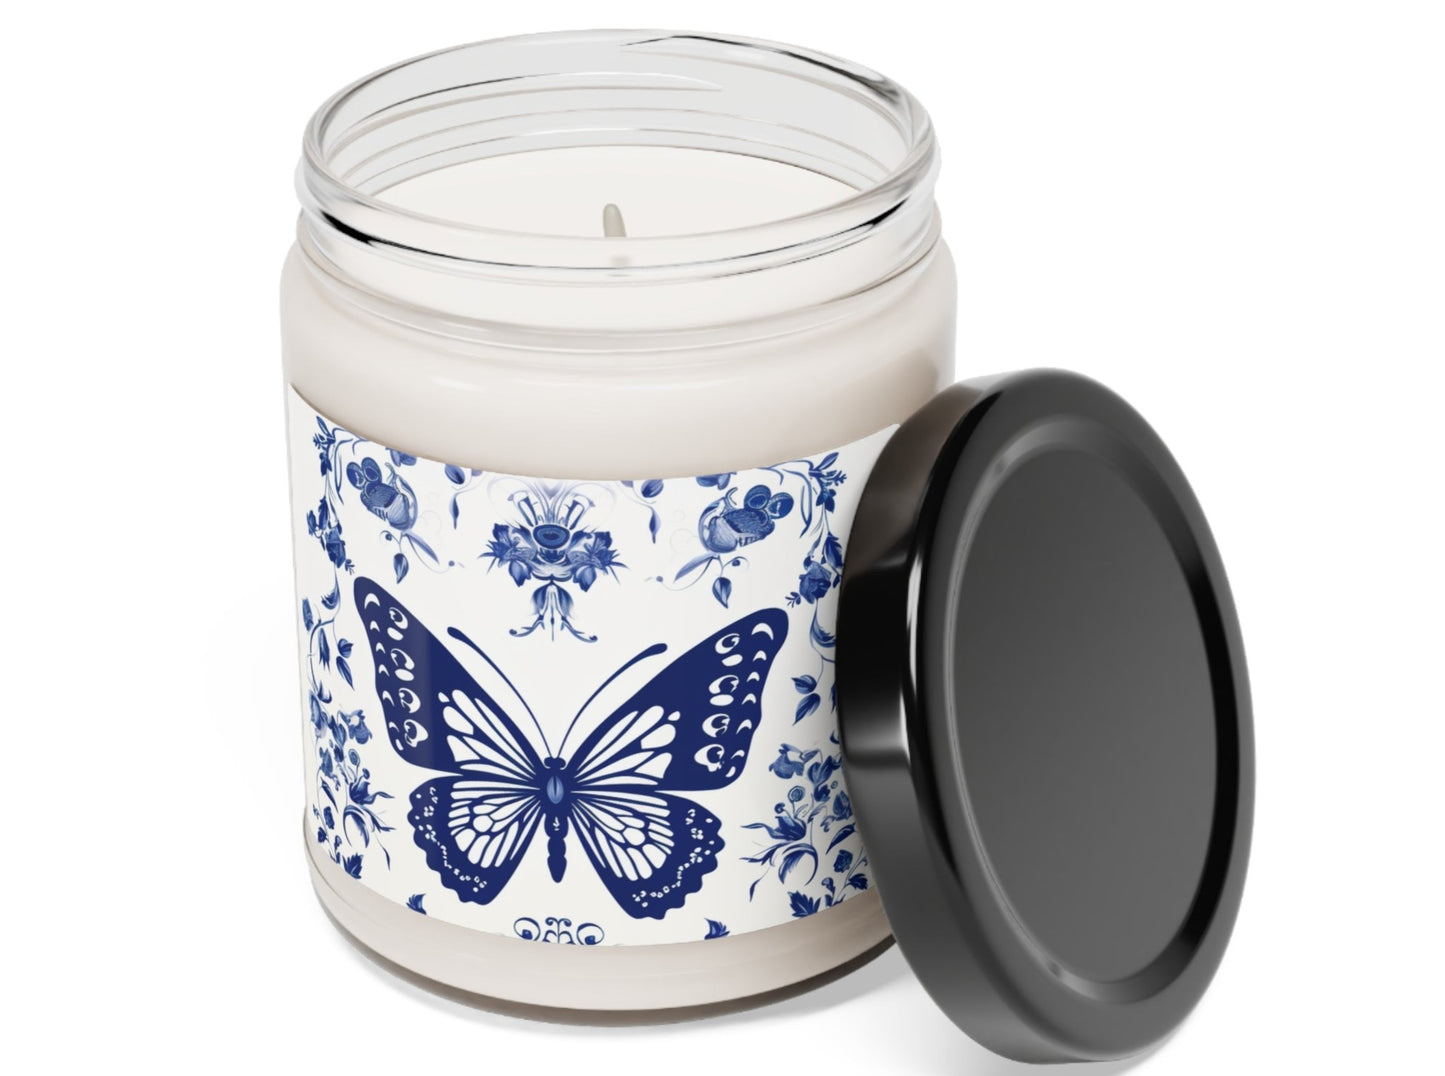 Butterfly | Scented Soy Candle, 9oz | Burning time: 50-60 hours